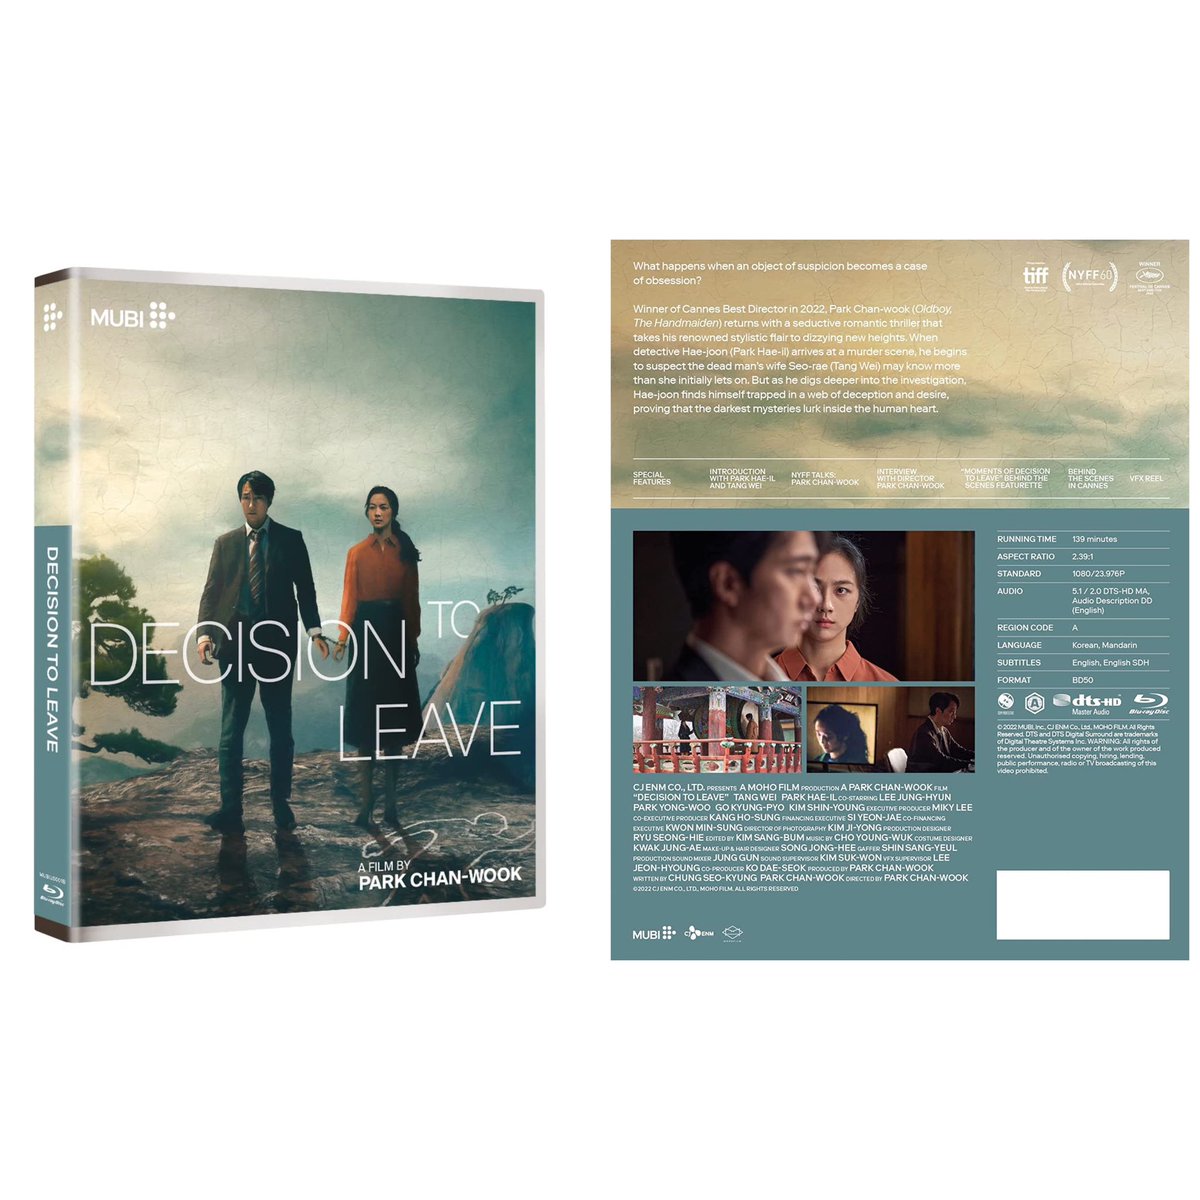 🇺🇸 ***NEW TITLE ANNOUNCEMENT*** 🇺🇸 Coming to #Bluray via @mubi on December 13, 2022 Written & Directed by #ParkChanWook Decision to leave (2022) #FilmTwitter #Cinema #Korea